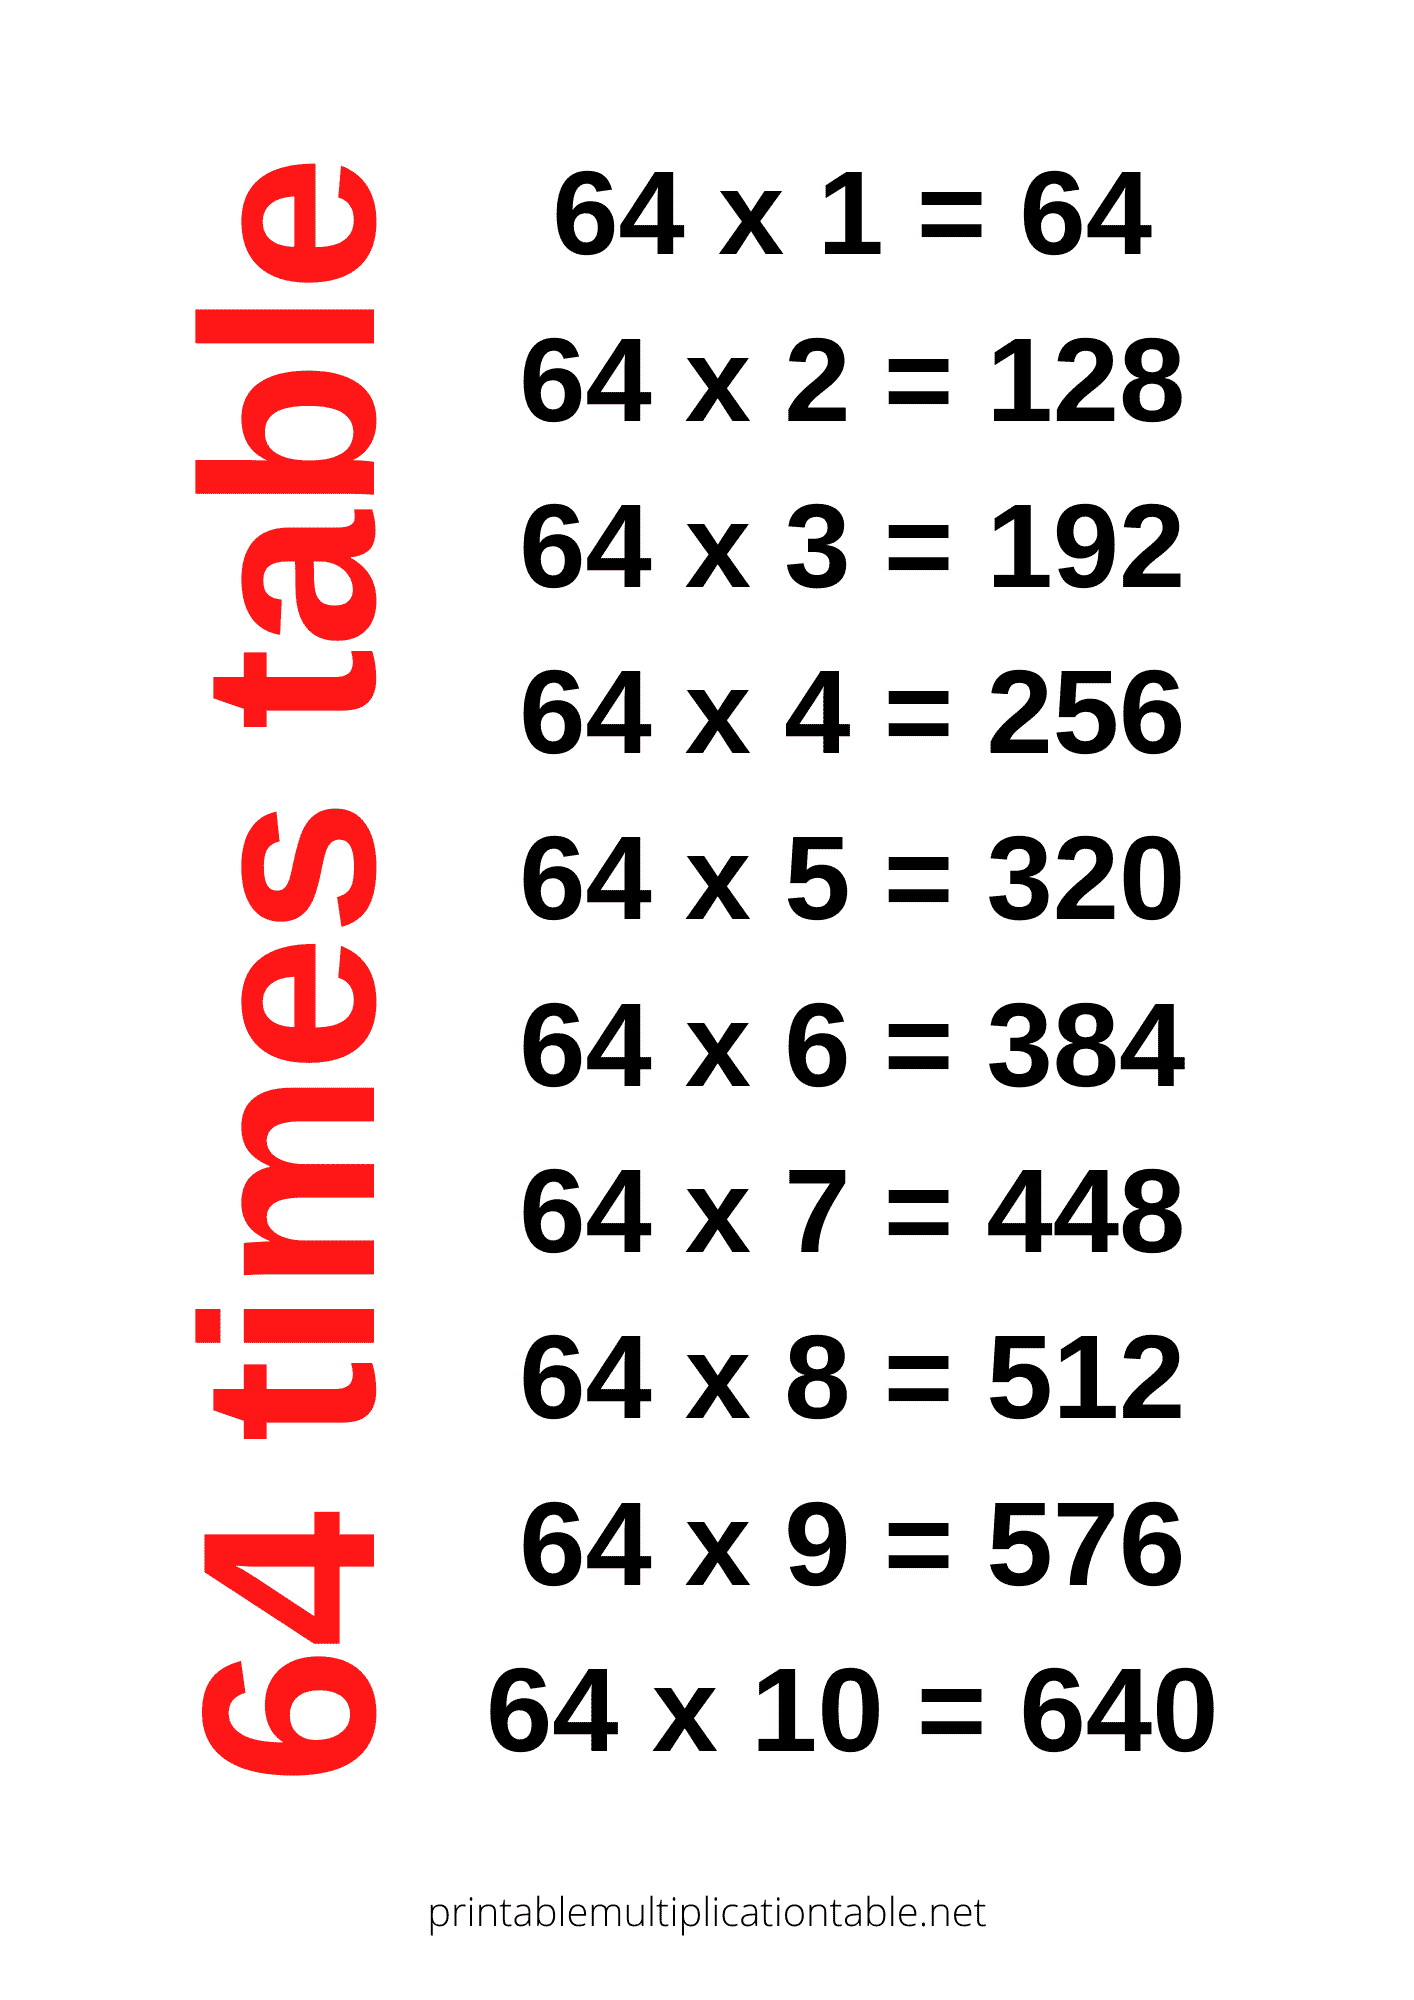 64 times table chart